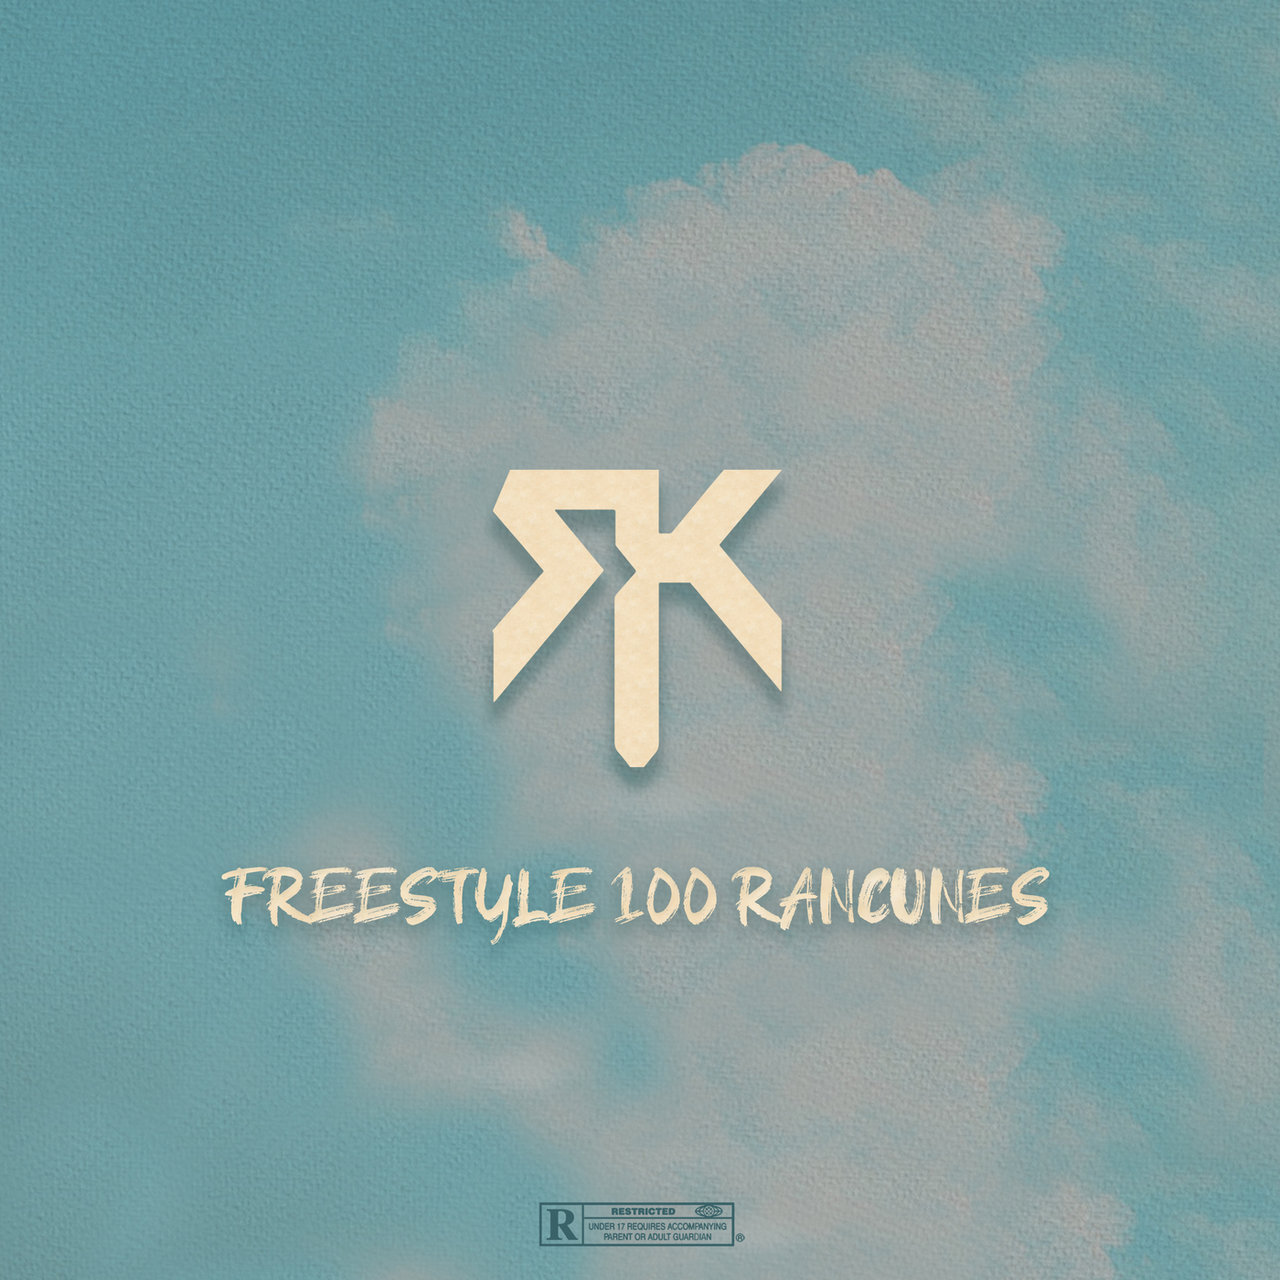 RK - Freestyle 100 Rancunes (Cover)